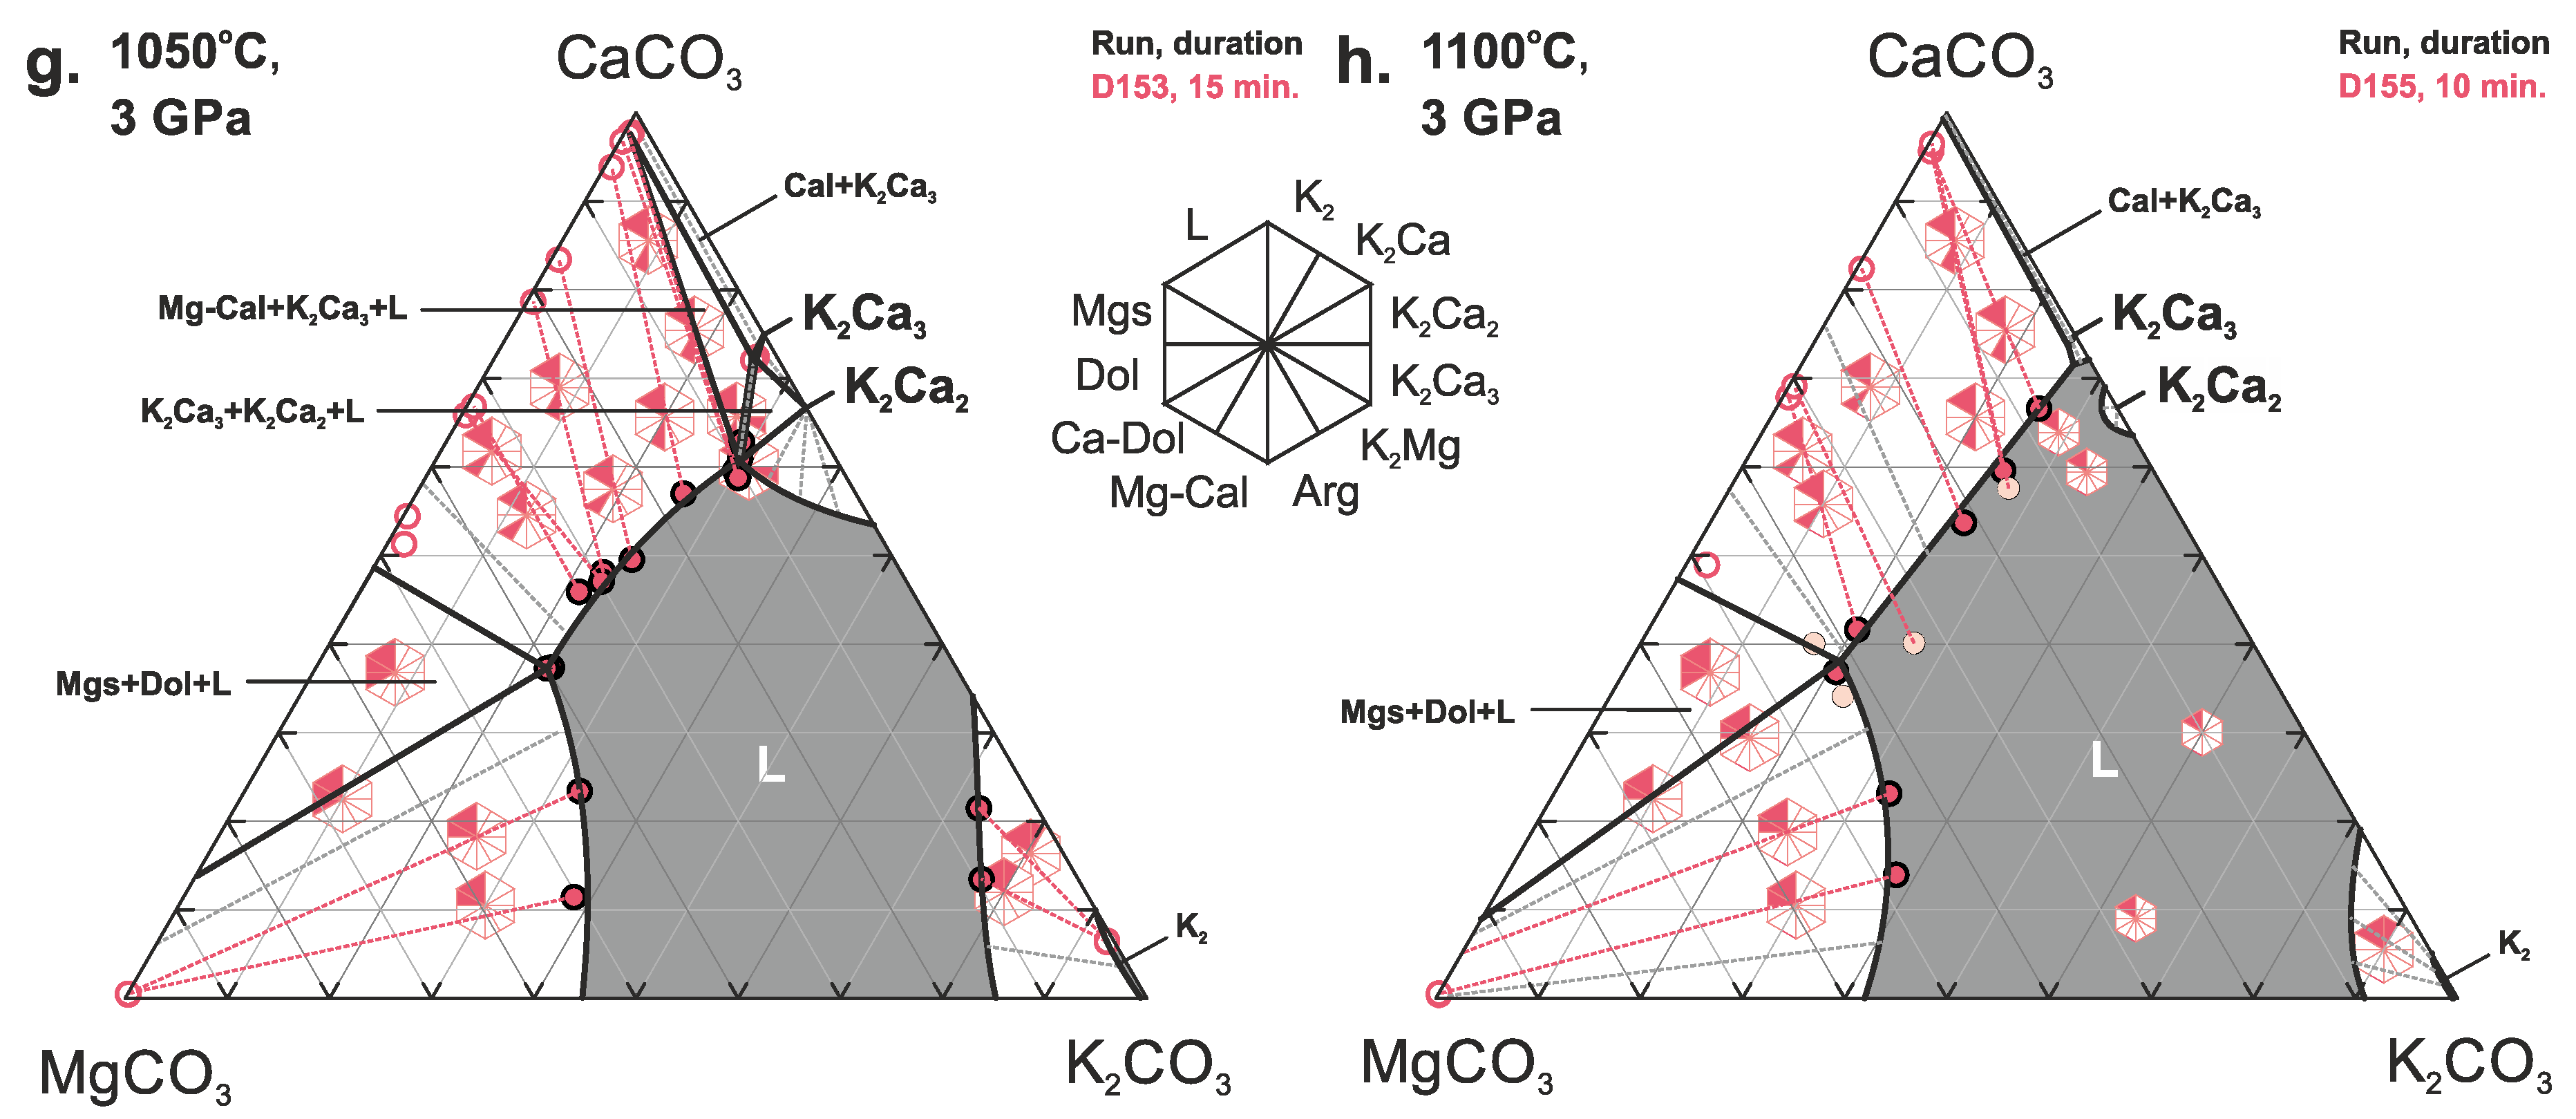 Minerals Free Full Text The System K2co3 Caco3 Mgco3 At 3 Gpa Implications For Carbonatite Melt Compositions In The Shallow Continental Lithosphere Html